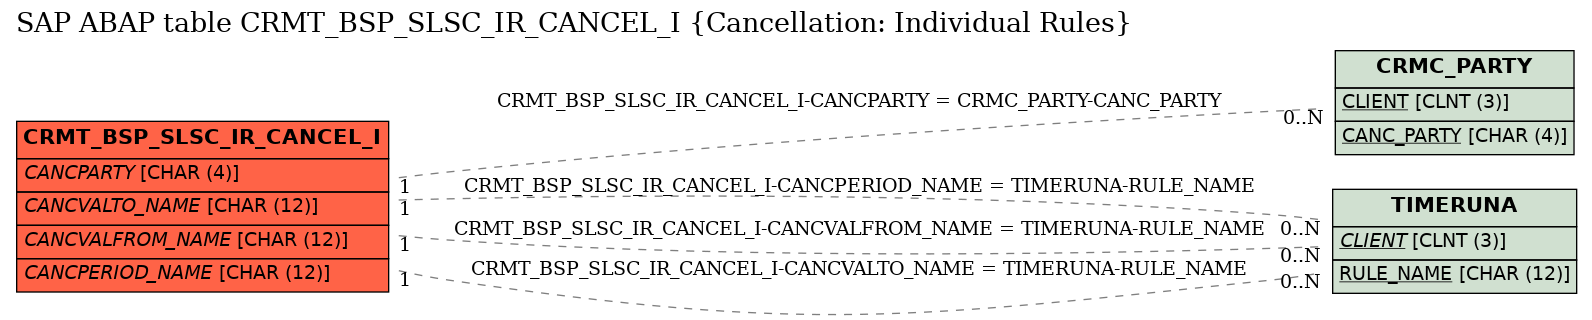 E-R Diagram for table CRMT_BSP_SLSC_IR_CANCEL_I (Cancellation: Individual Rules)